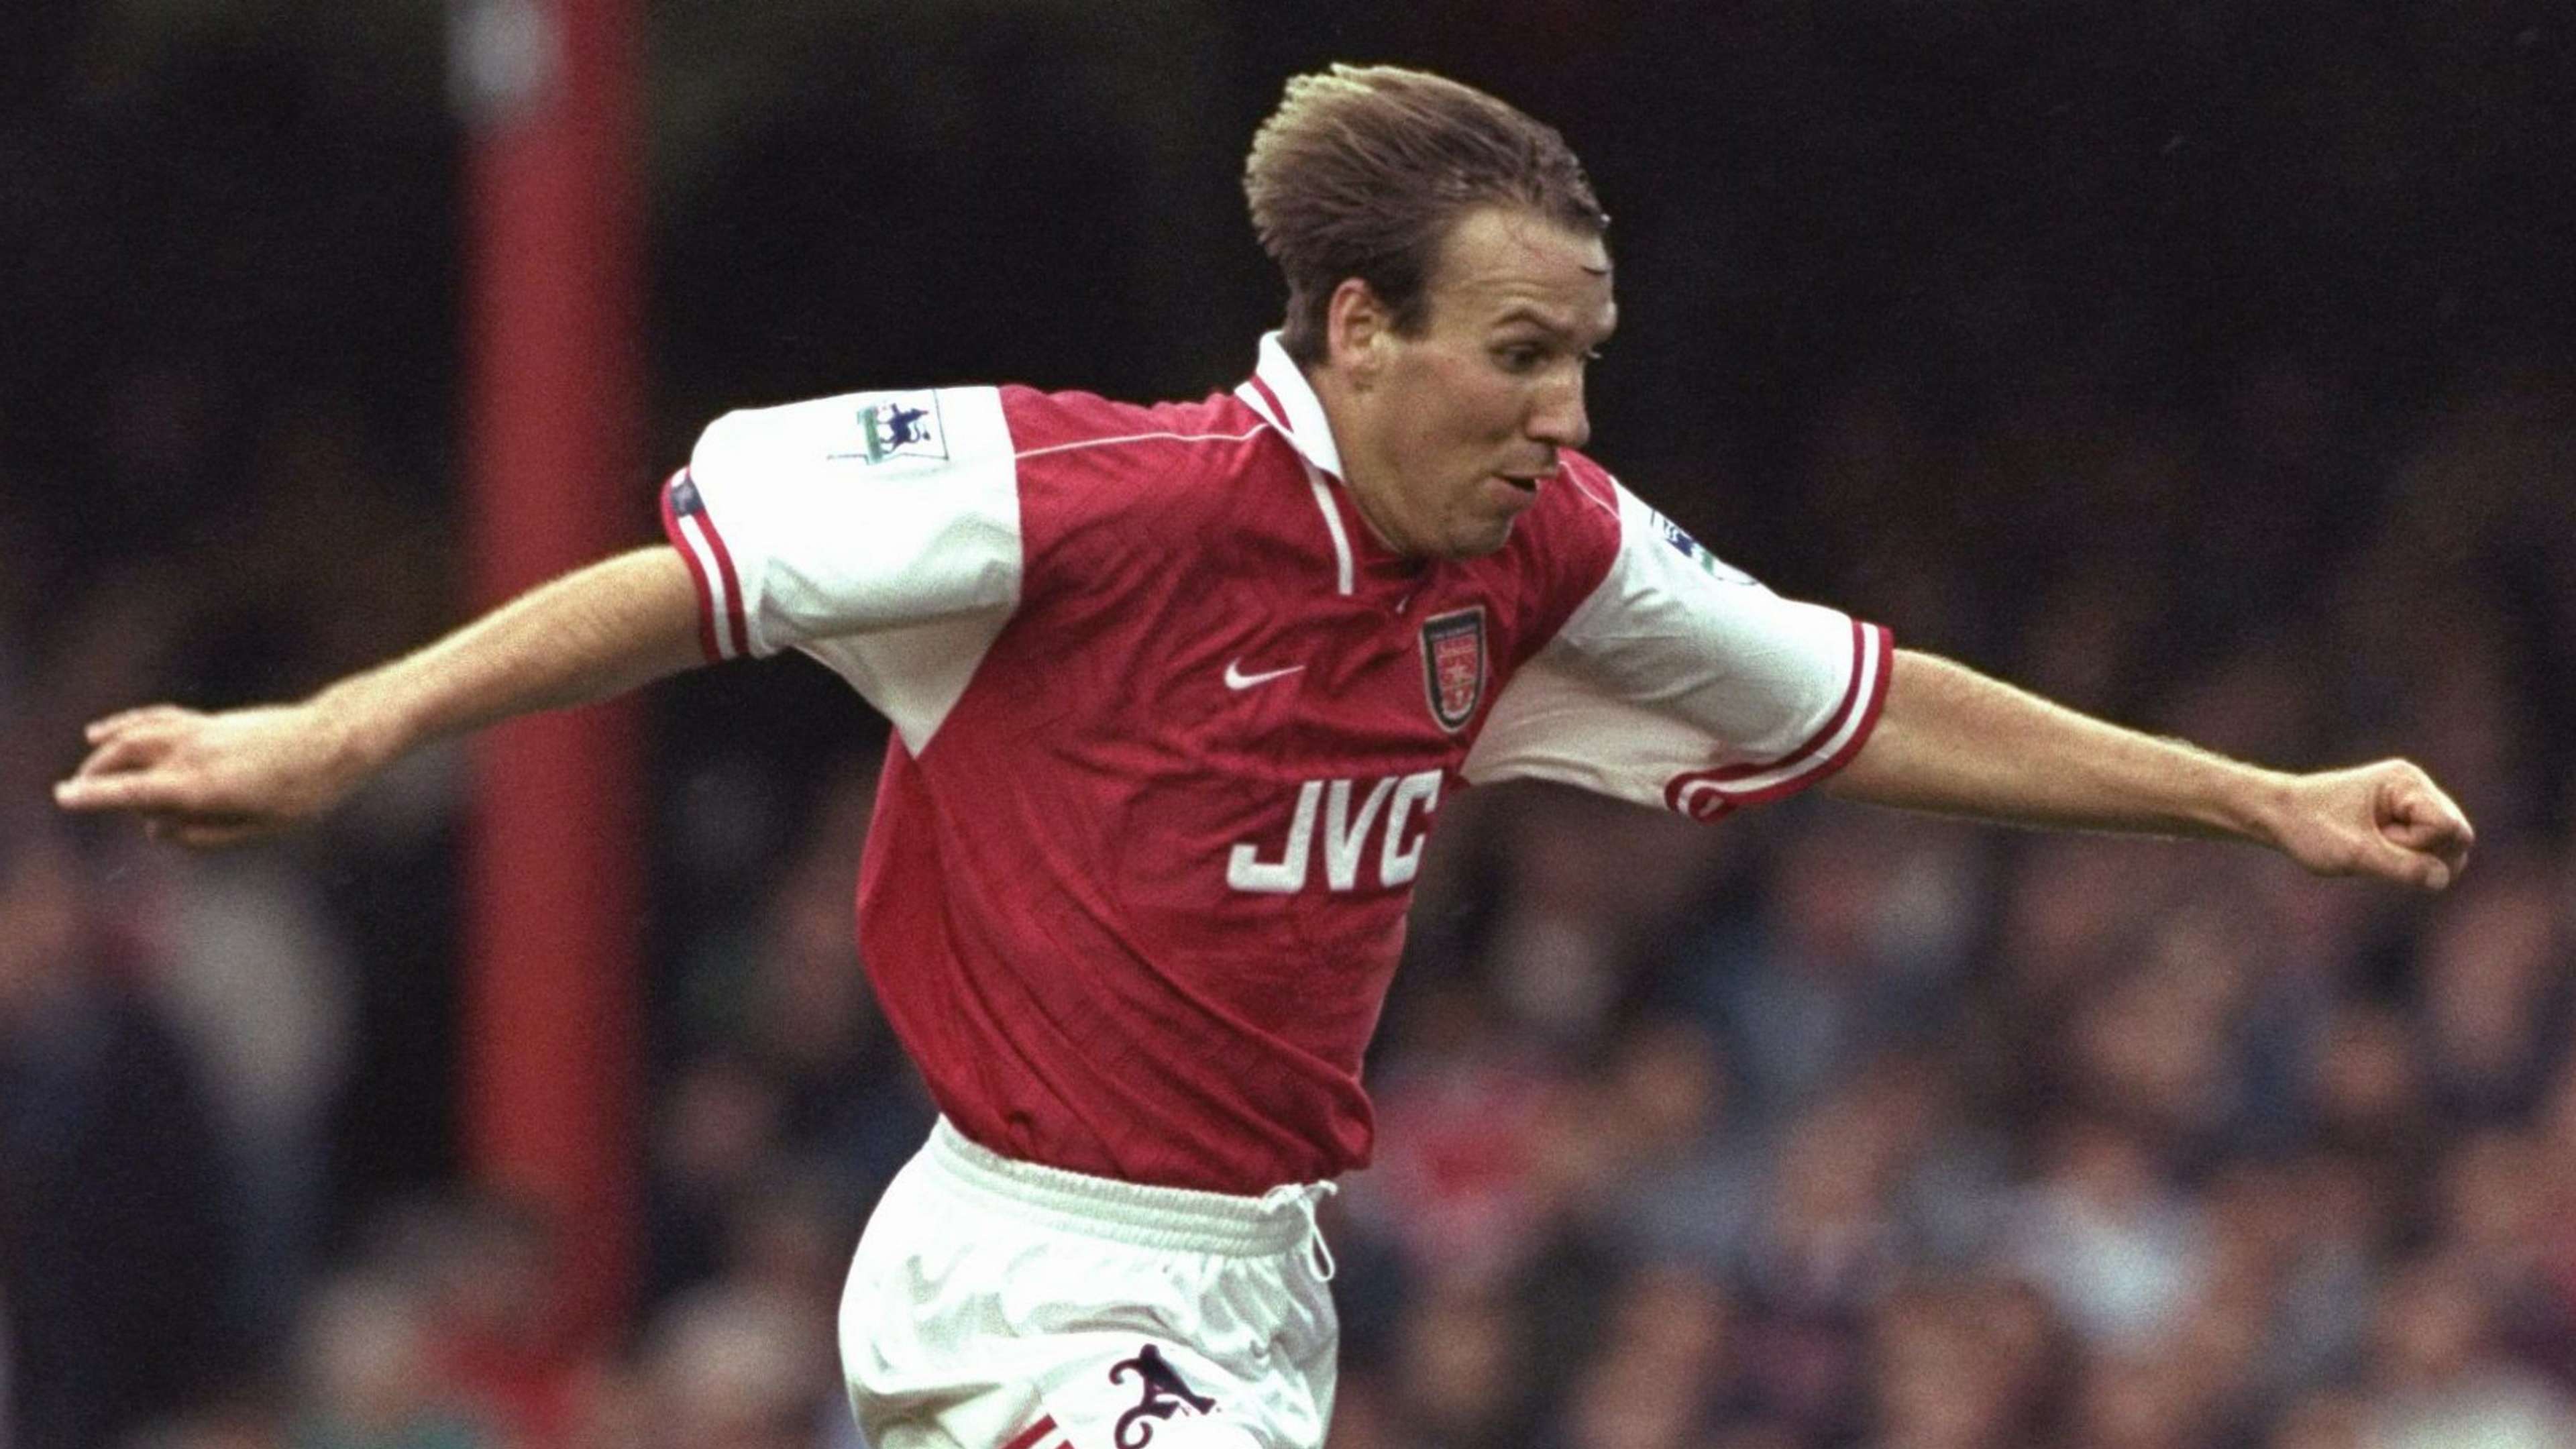 Paul Merson - Arsenal 0-0 Coventry City  - Oct 19, 1996